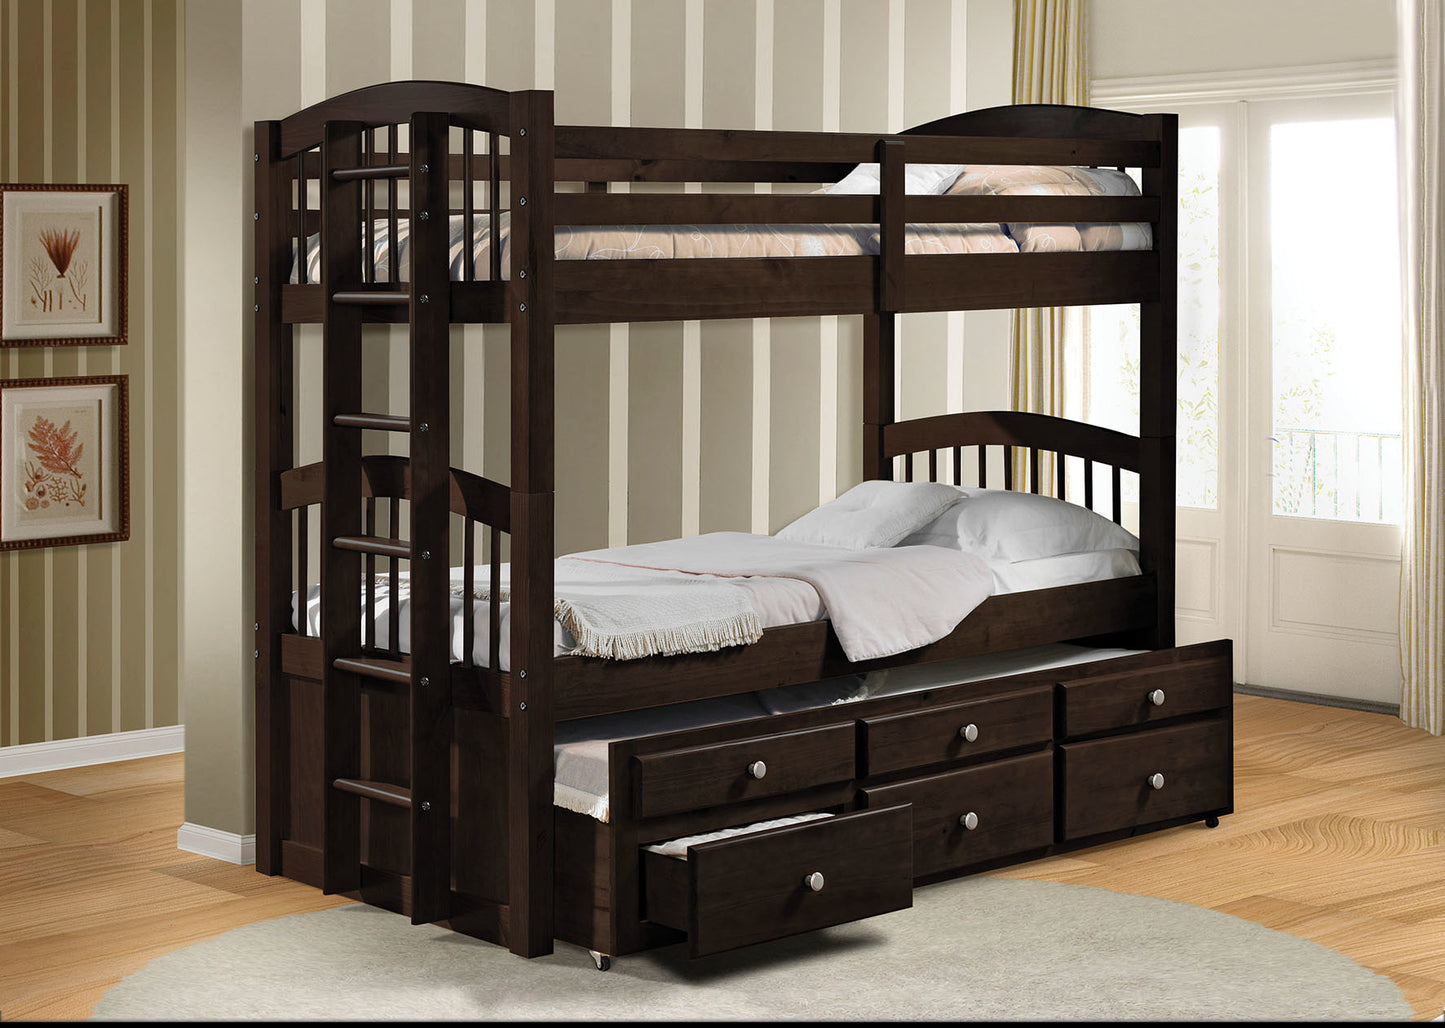 80" X 41" X 71" Espresso Twin Over Twin Bunk Bed And Trundle With 3 Drawers